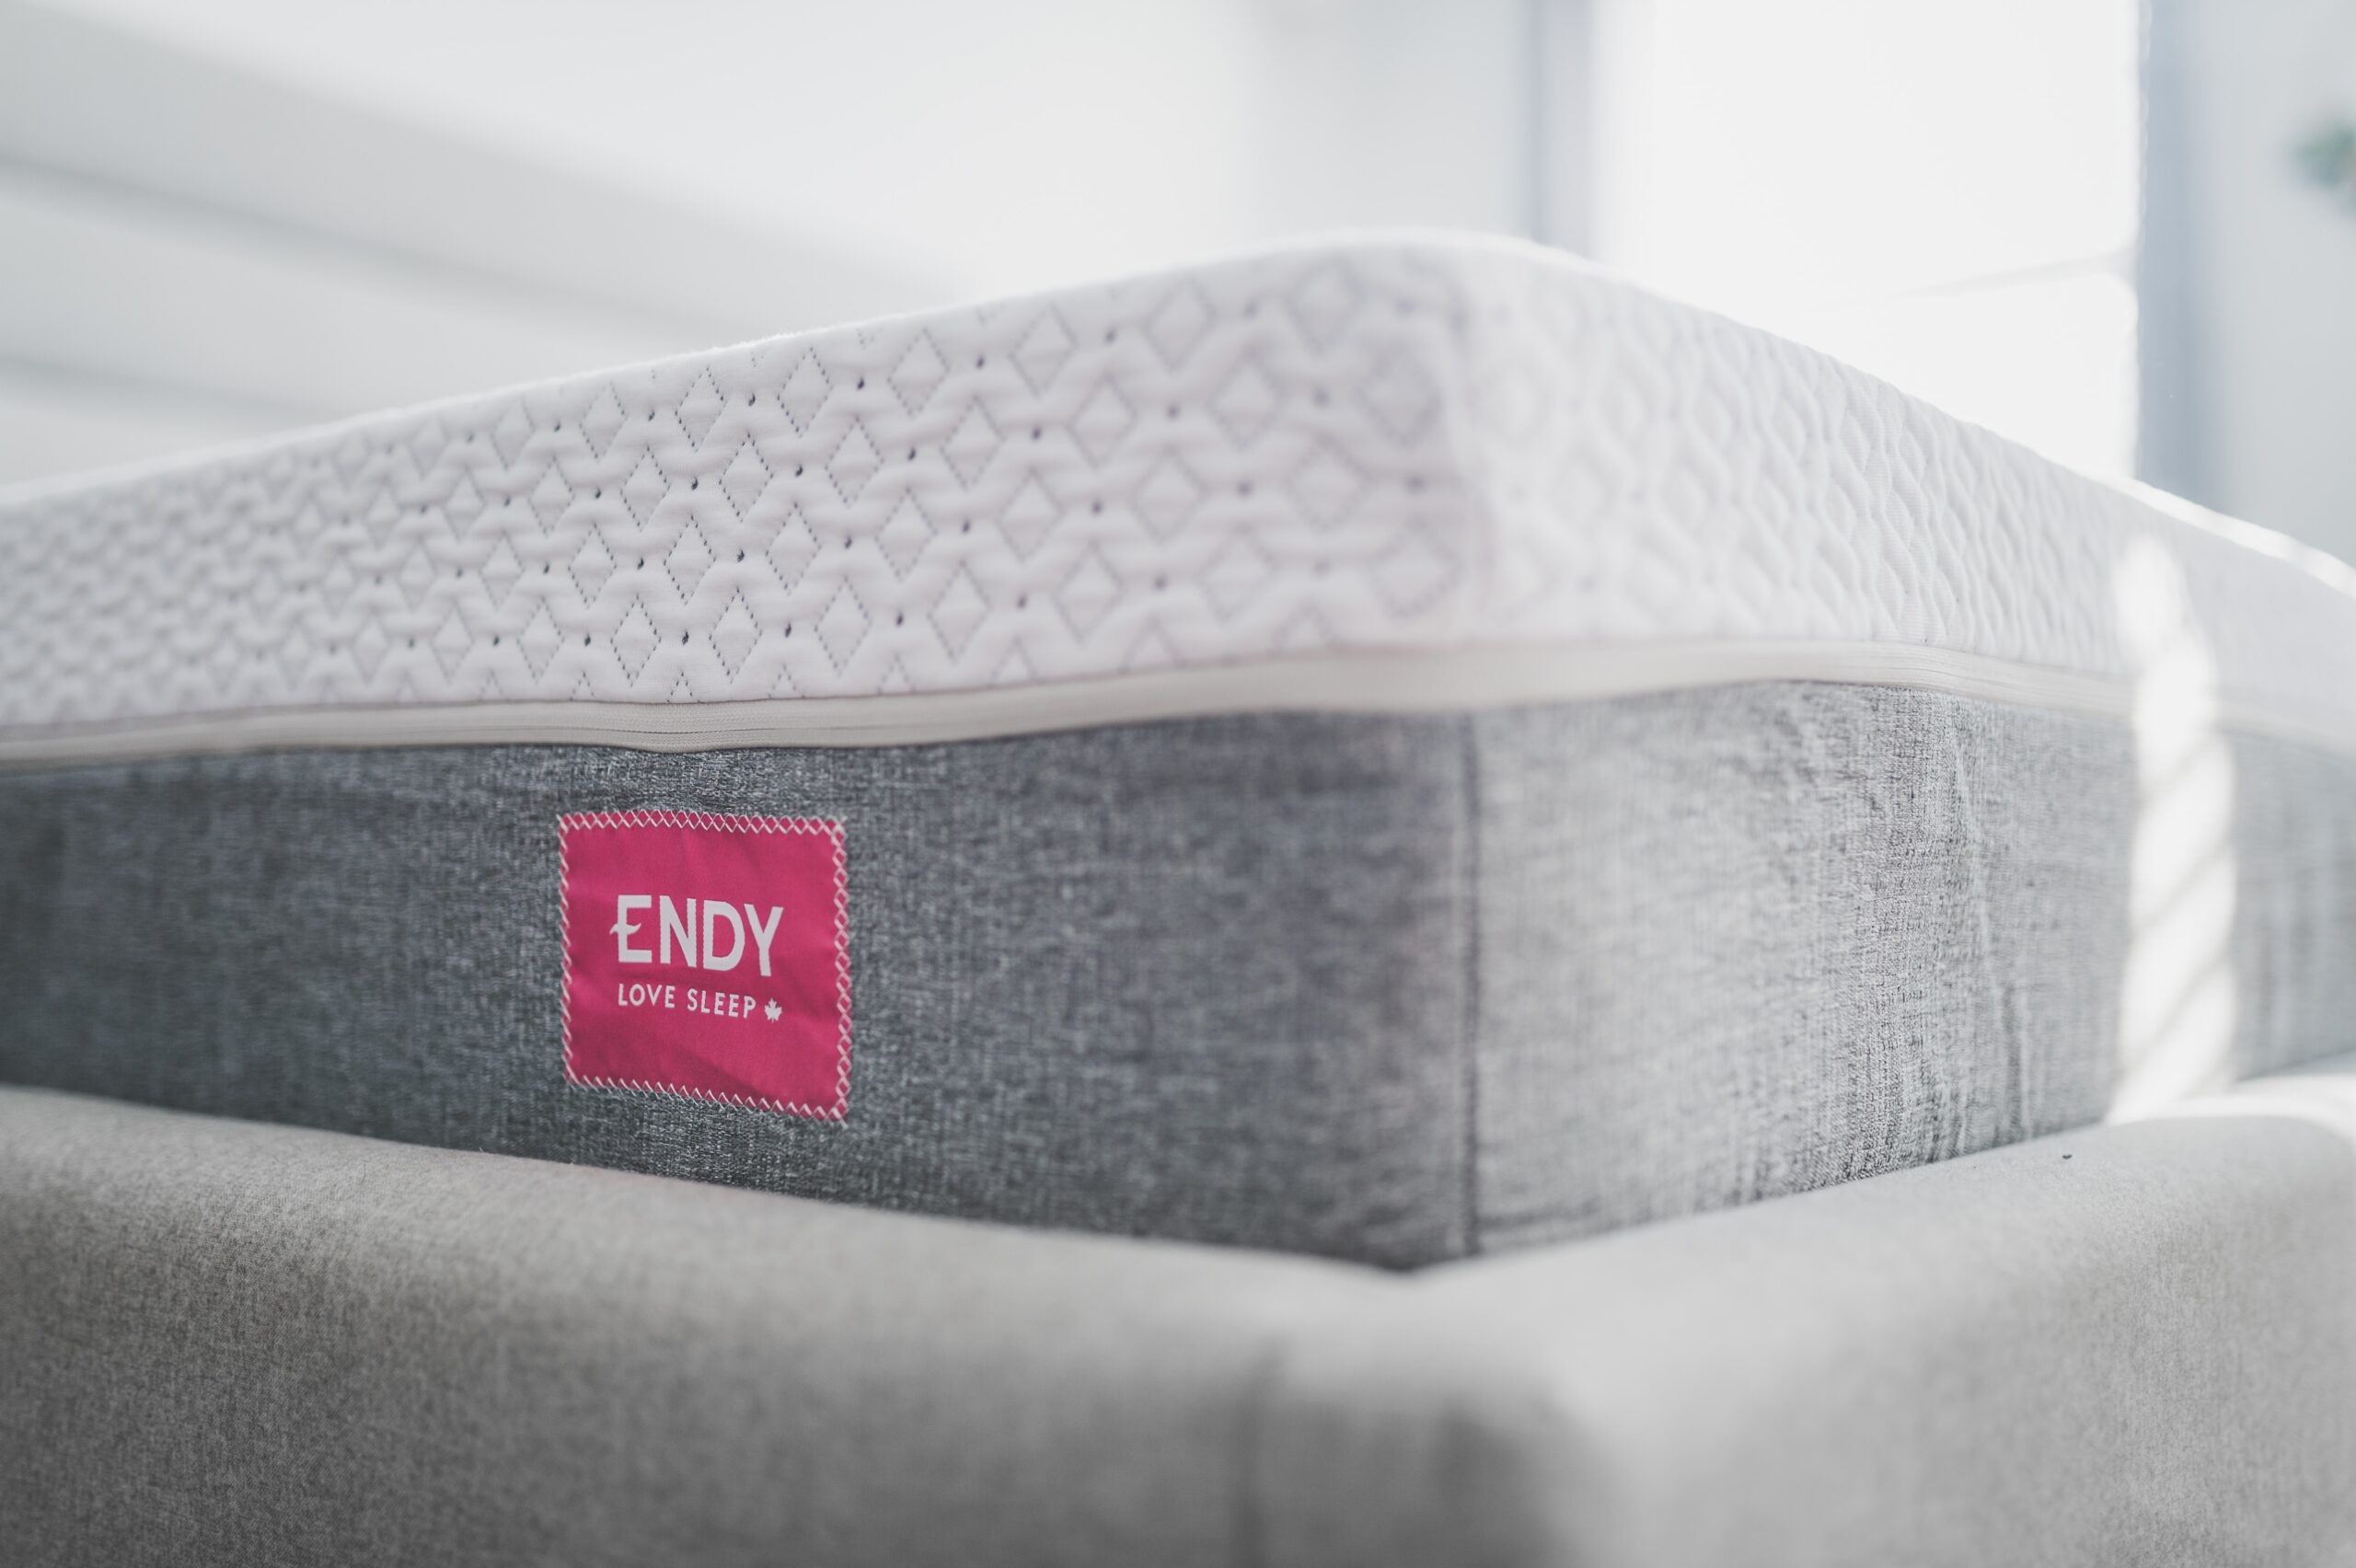 Thoroughly clean your mattresses with bleach to rid your space of bed bugs. Pictured: A mattress.